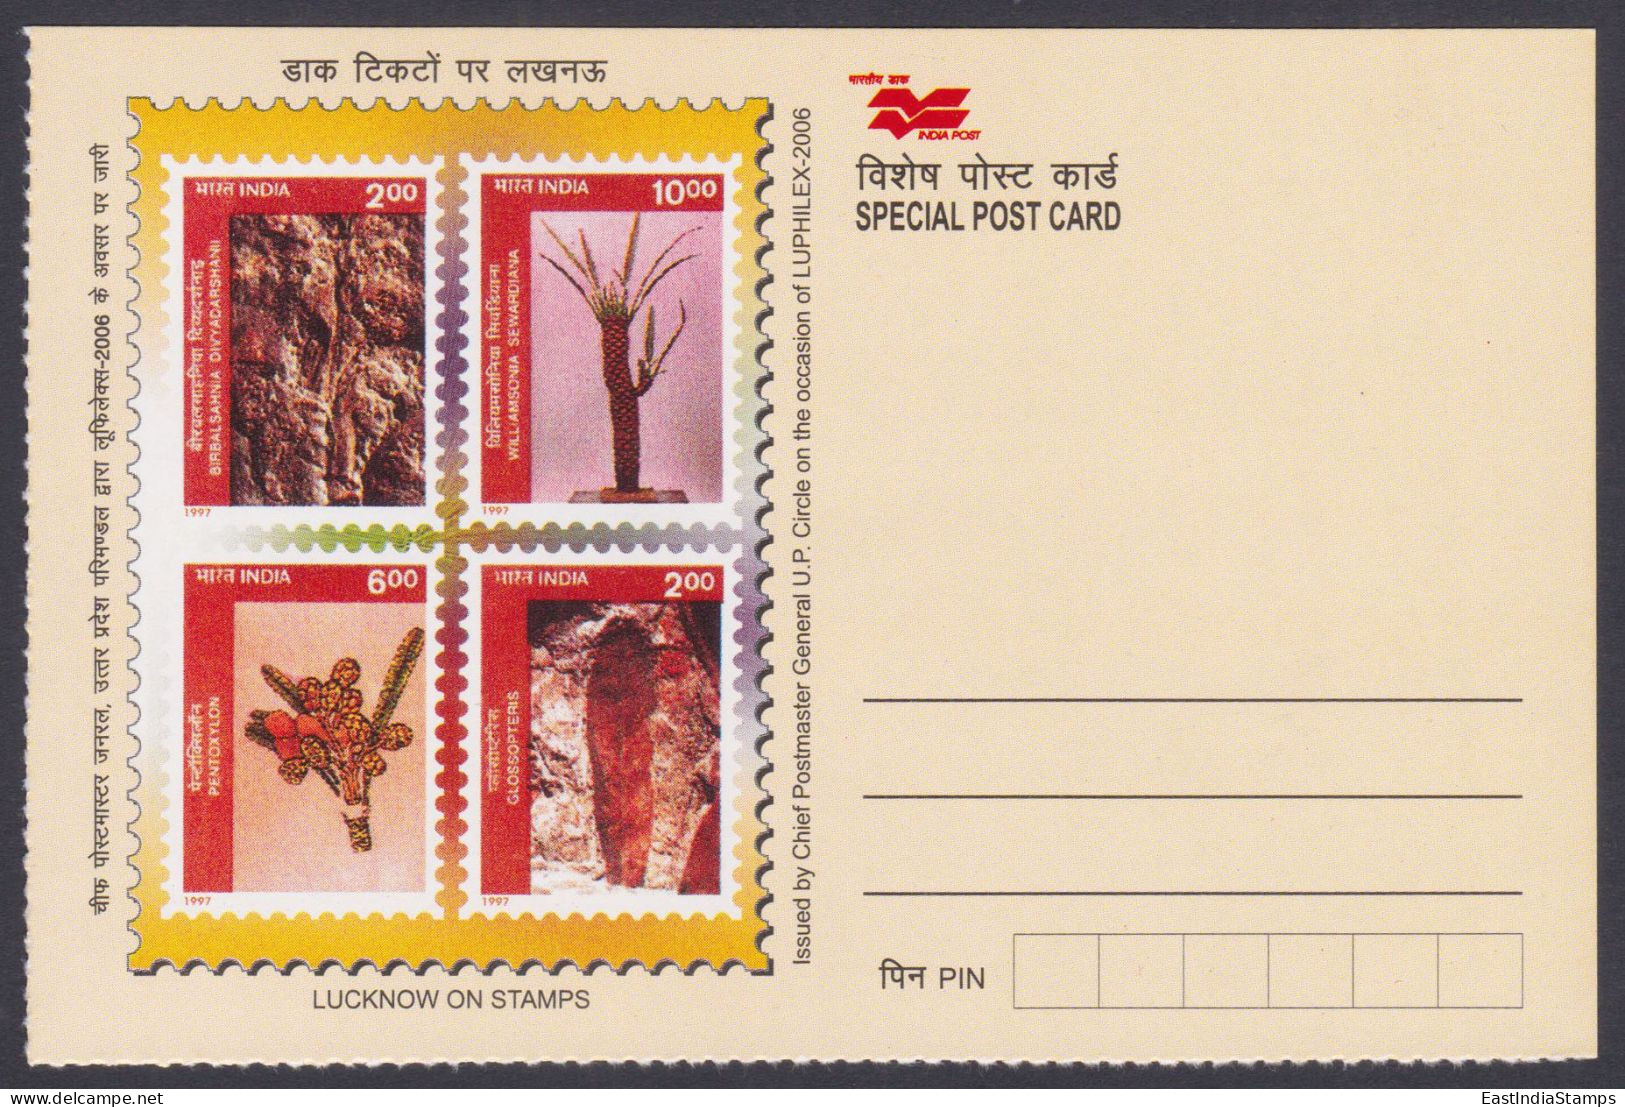 Inde India 2006 Mint Postcard Archaeology, Archaeological Artifacts, Art, Arts, Lucknow, UPhilex Philatelic Exhibition - Inde